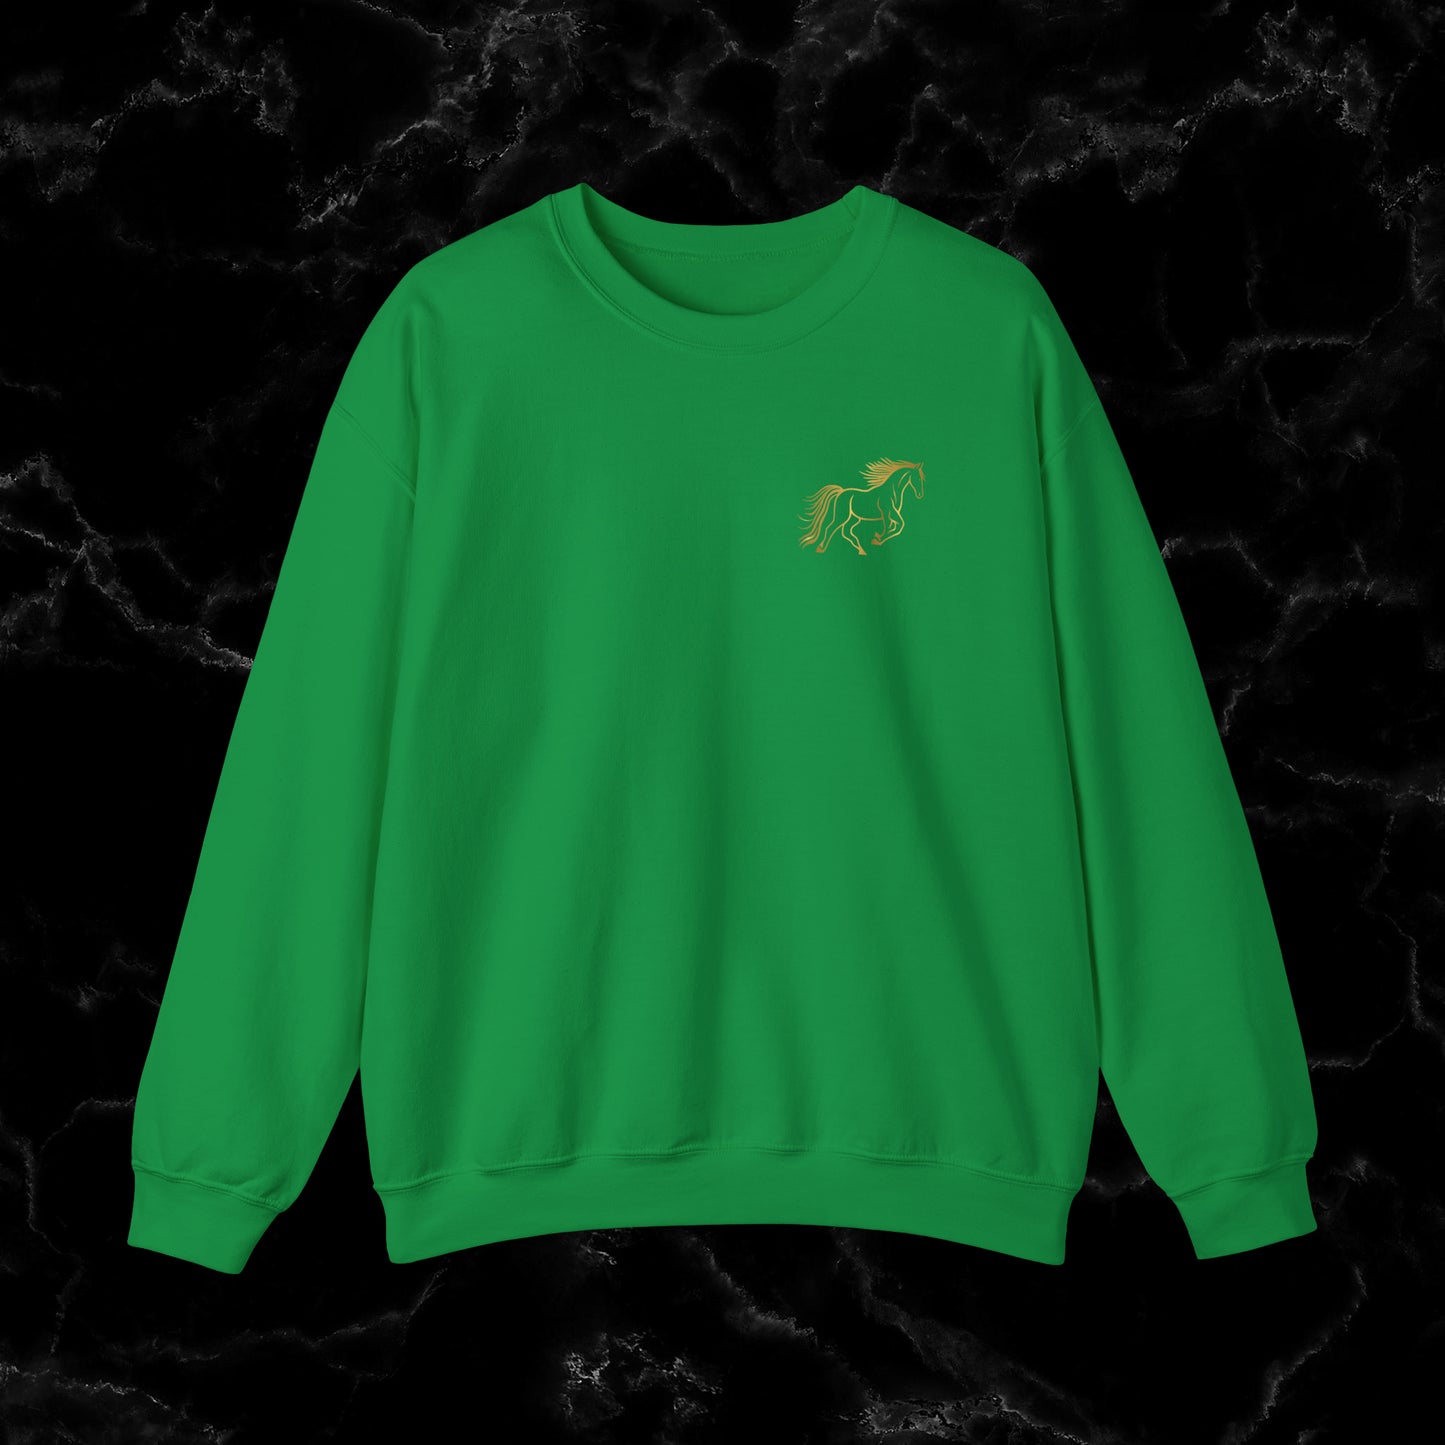 Personalized Horse Sweatshirt - Gift for Horse Owner, Perfect for Christmas, Birthdays, and Equestrian Enthusiasts Sweatshirt S Irish Green 